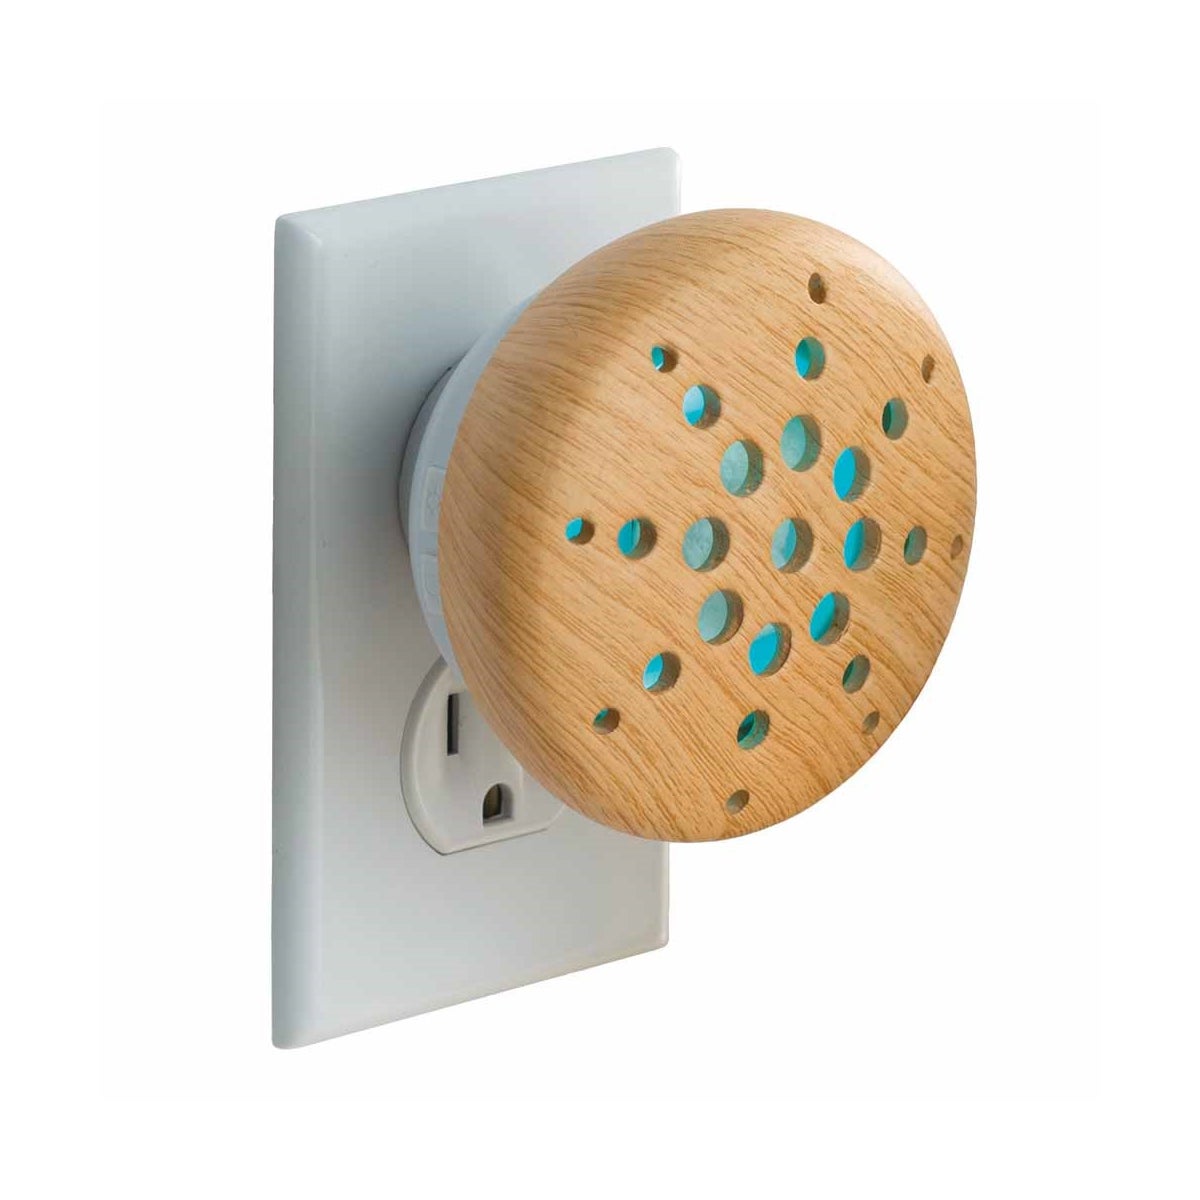 Pluggable Essential Oil Diffuser - Bamboo